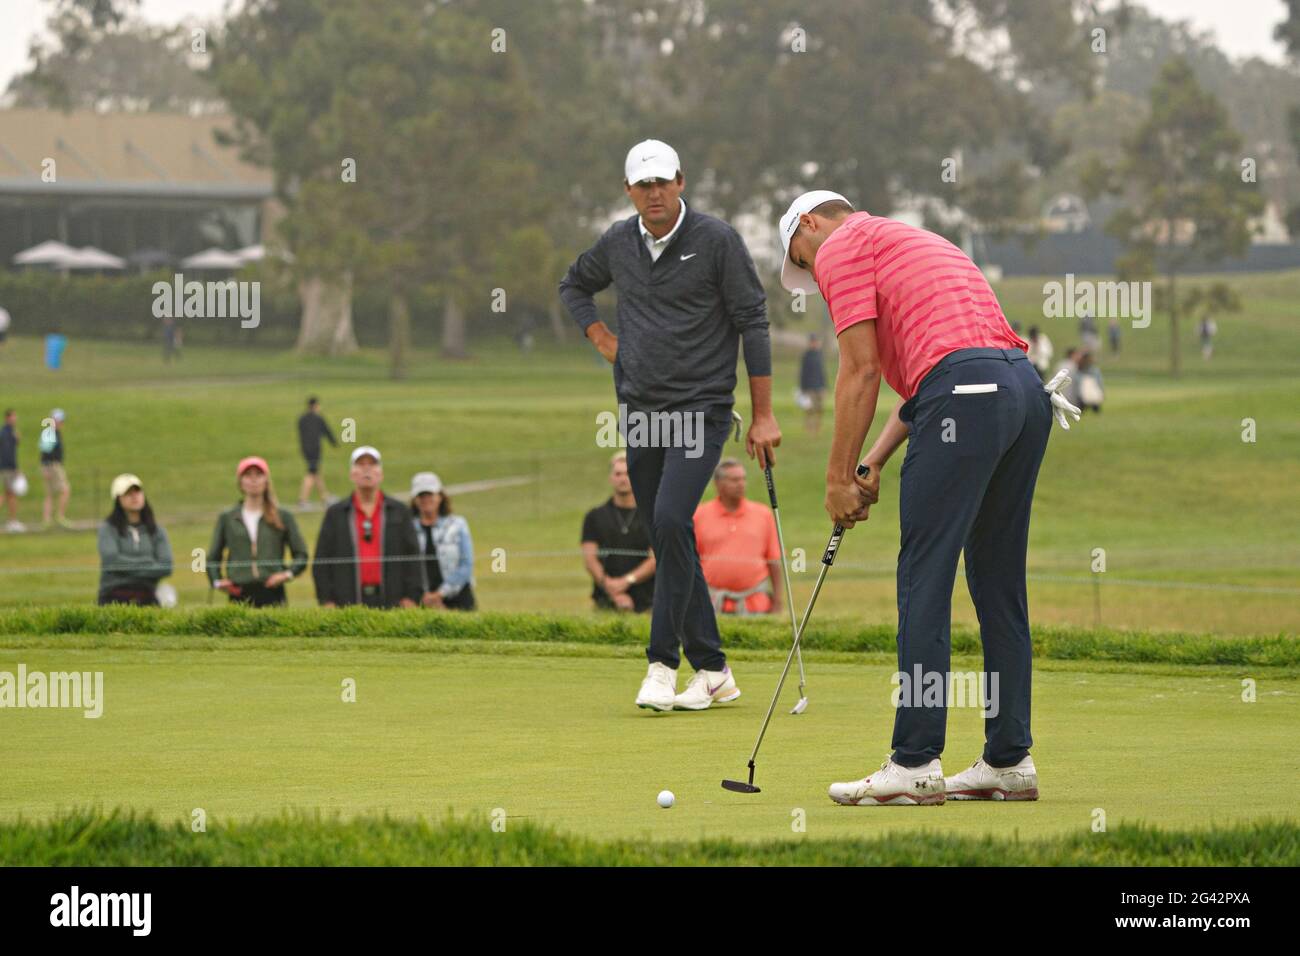 San Diego, USA. 18th June, 2021. Scottie Scheffler watches Jordan Spieth hit a putt on the sixth hole during the second round at the 121st US Open Championship at Torrey Pines Golf Course in San Diego, California on Friday, June 18, 2021. Photo by Richard Ellis/UPI Credit: UPI/Alamy Live News Stock Photo